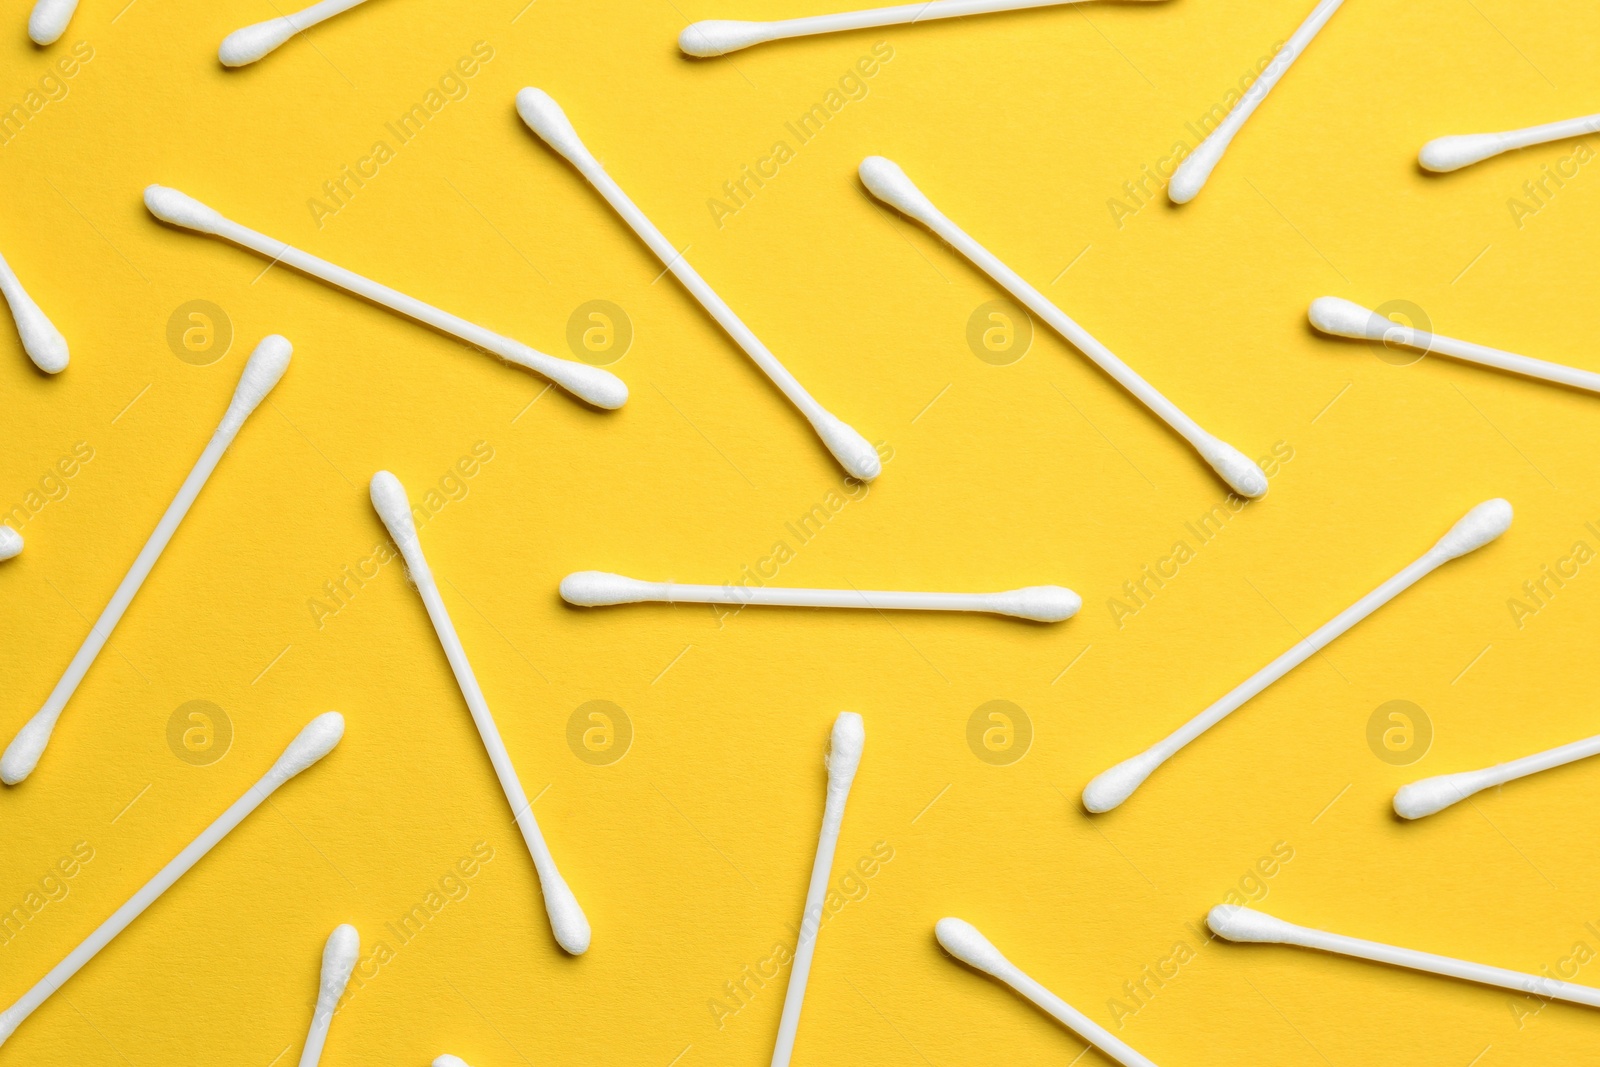 Photo of Many cotton buds on yellow background, flat lay